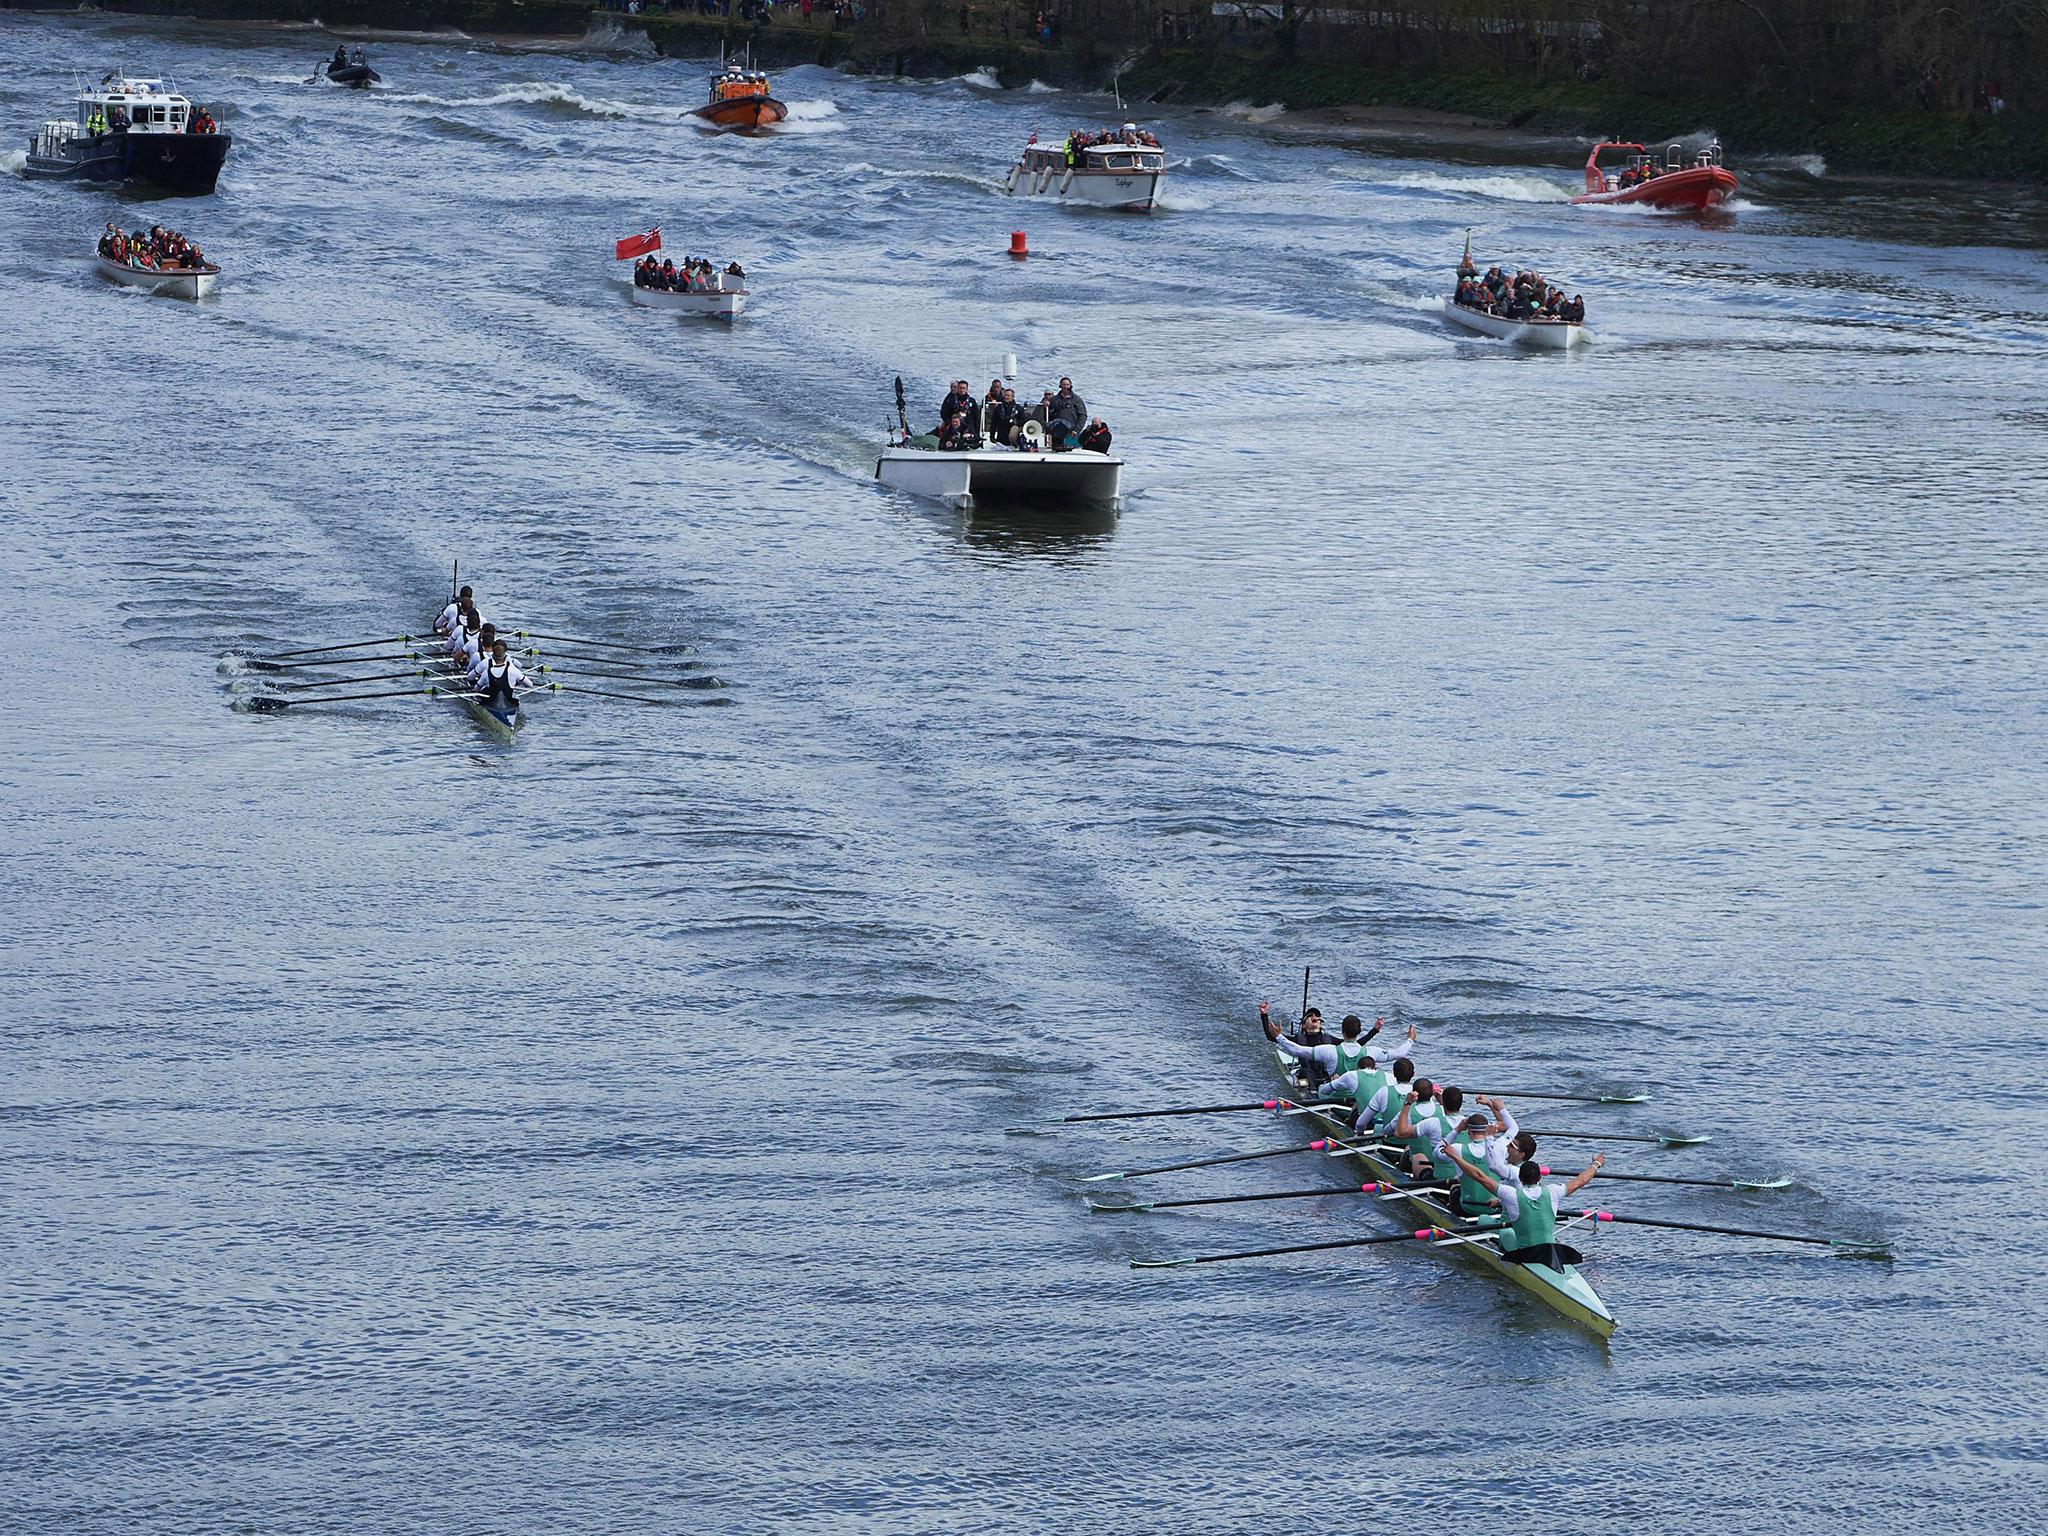 The Cambridge (near R) crew lead Oxford crew as they row in to toward the finish line with the flotilla following in the annual men's boat race between Oxford and Cambridge University on the River Thames in London on March 27, 201